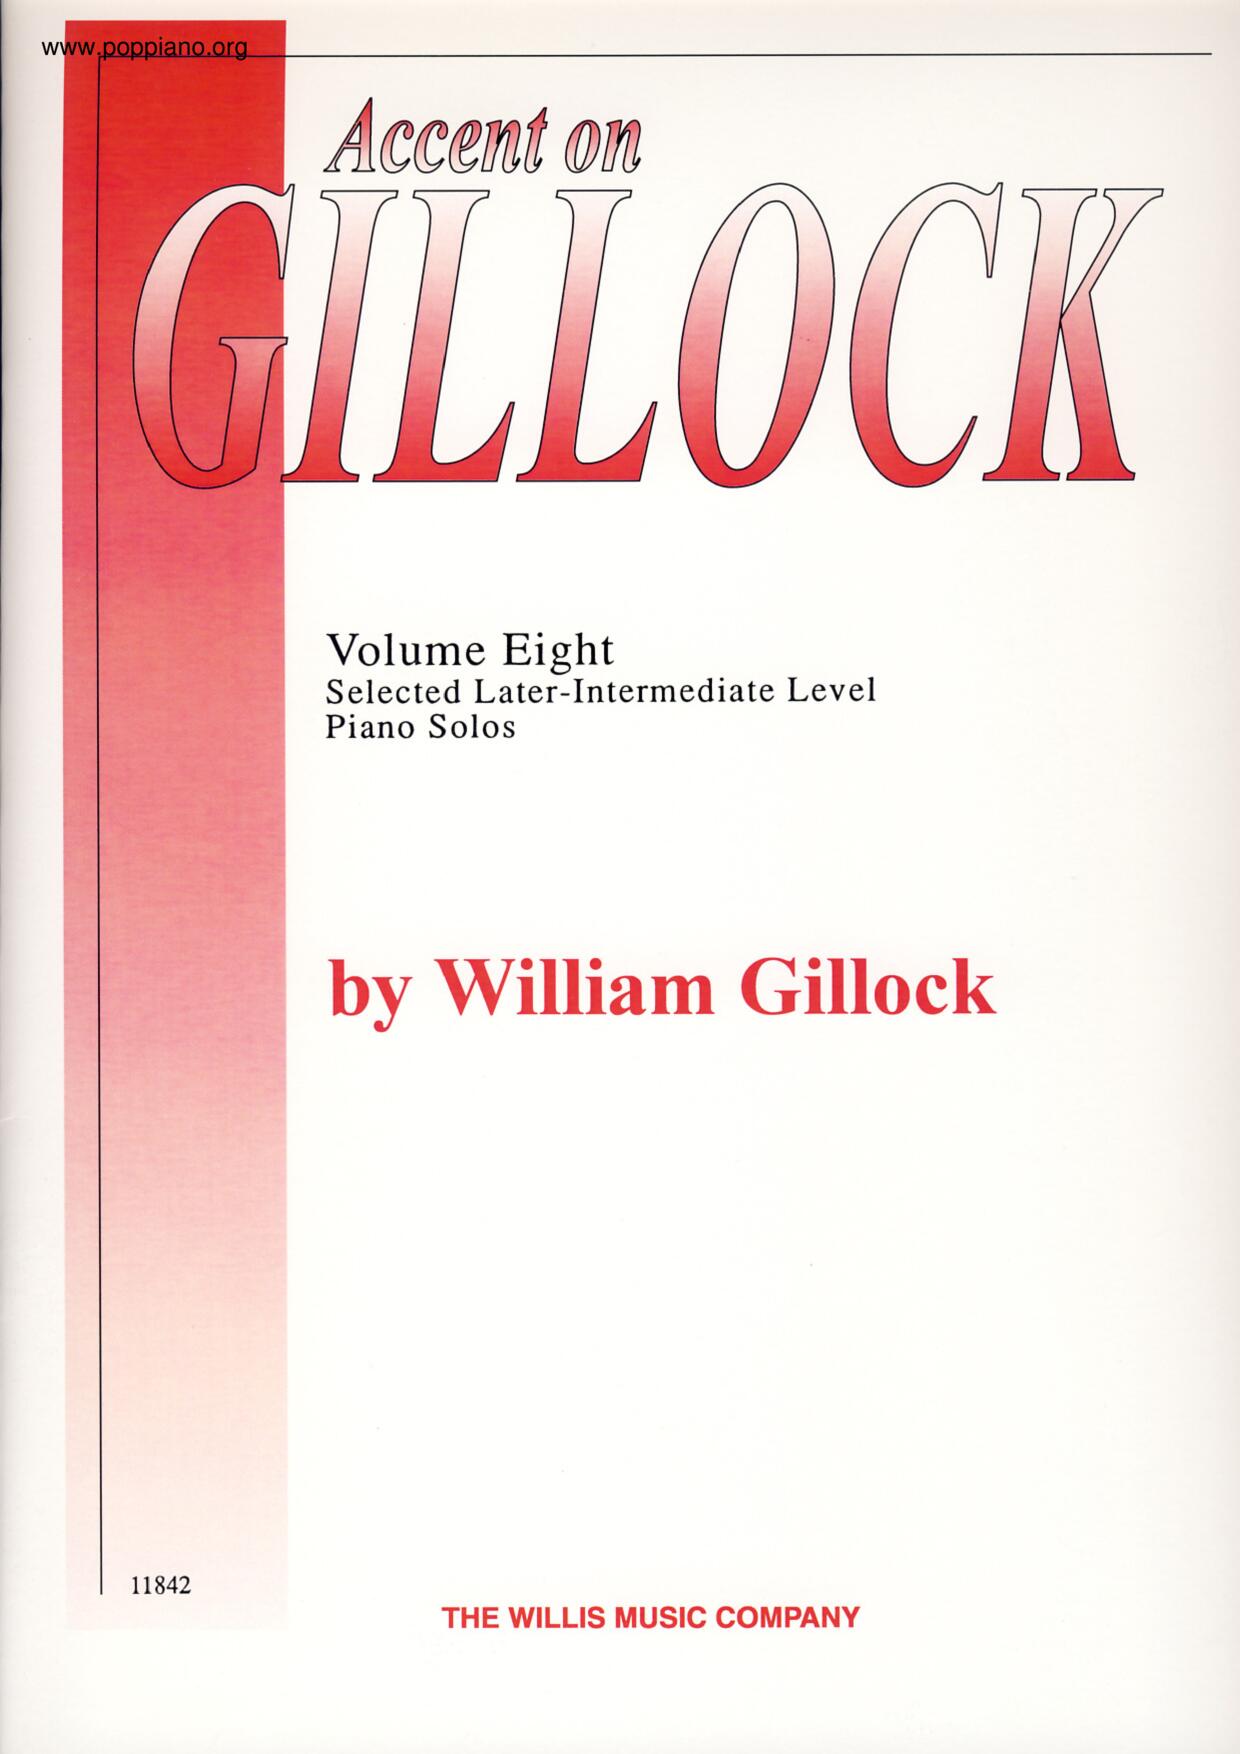 Accent On Gillock Volume 8 - 18 pages琴譜